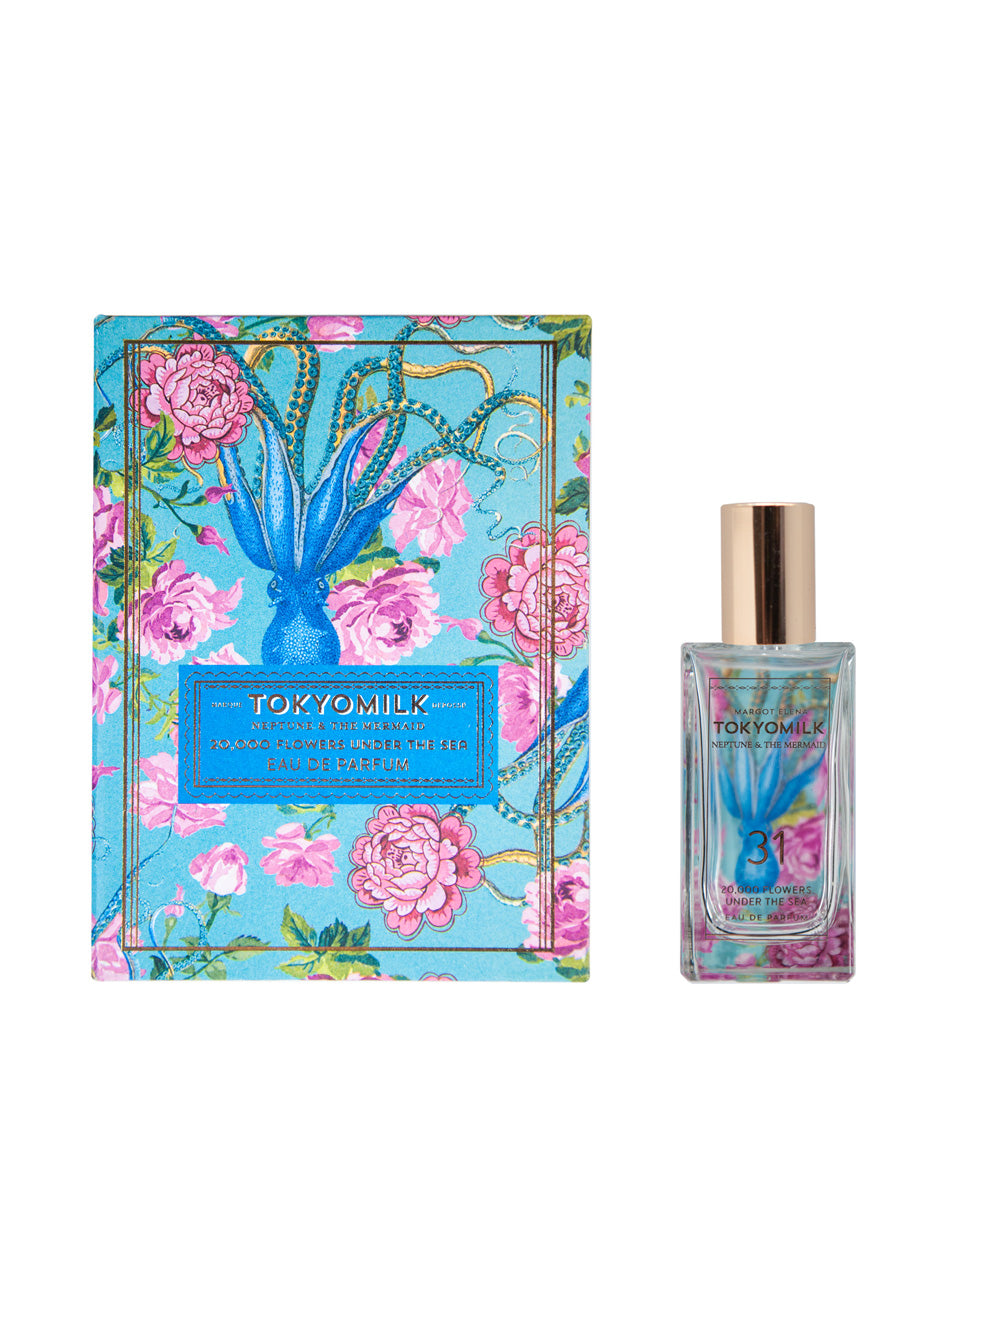 A bottle of Margot Elena's TokyoMilk Neptune & The Mermaid 20,000 Flowers Under The Sea No. 31 Parfum with hints of white lily next to its floral-patterned packaging box in shades of turquoise and pink with gold accents.